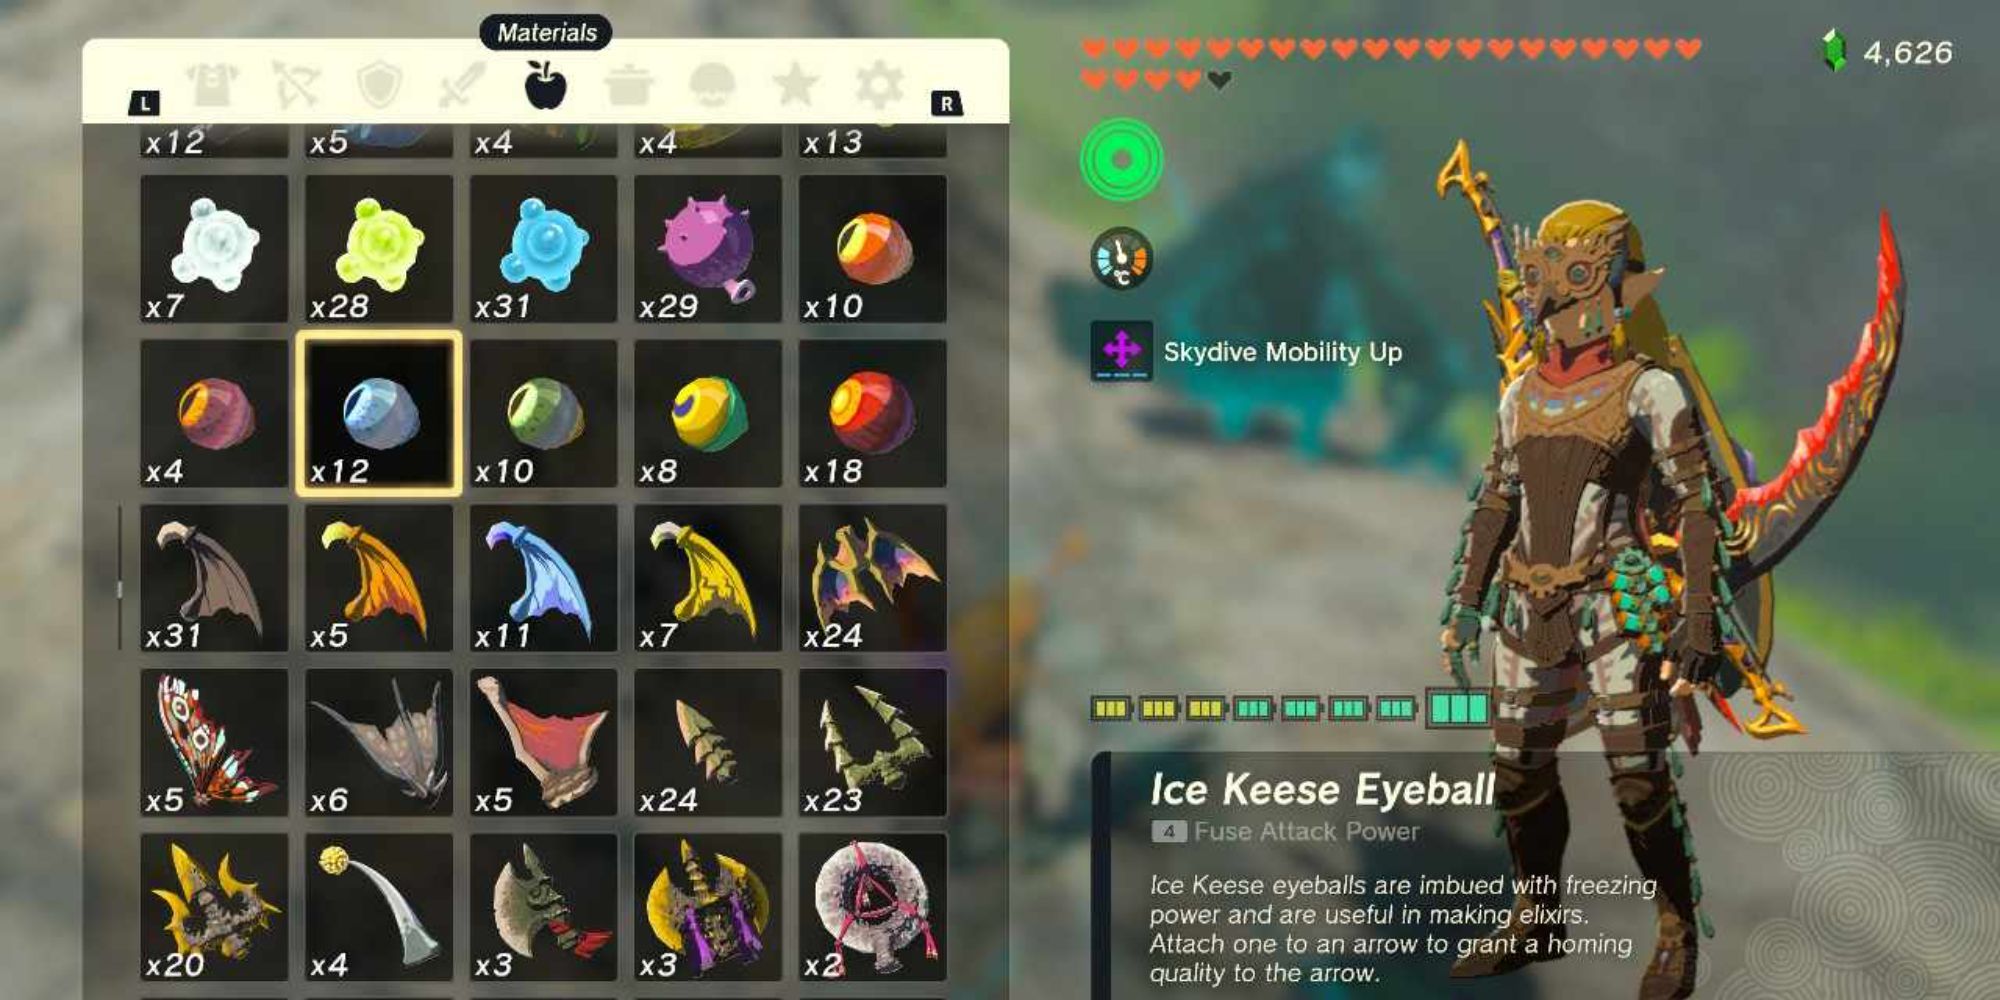 Link from Tears of the Kingdom stood beside his inventory, which is showing an Ice Keese Eyeball